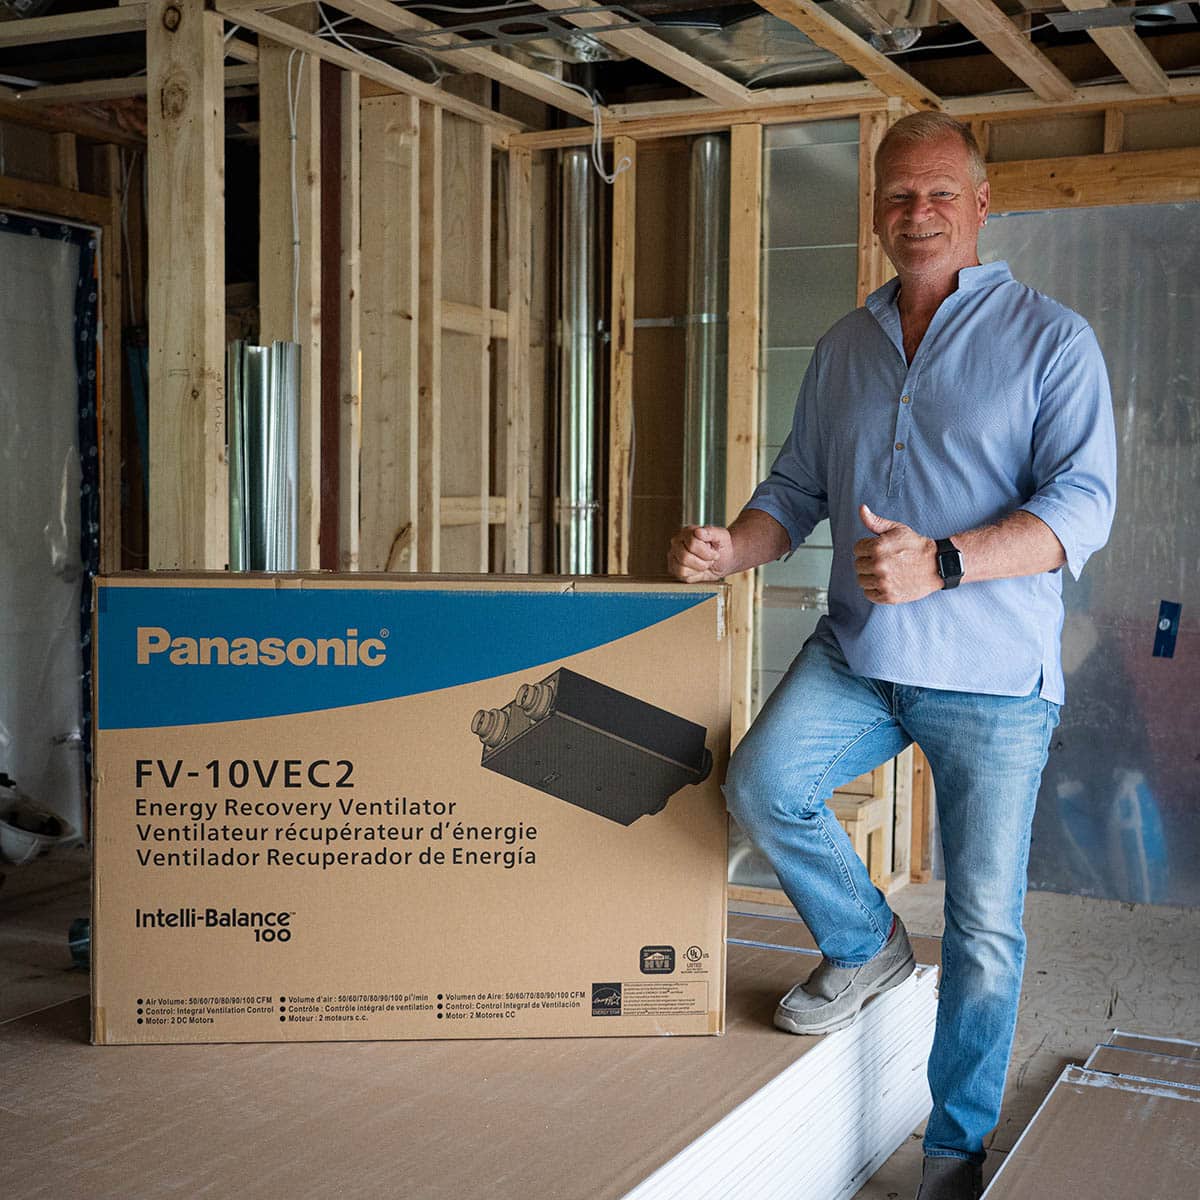 Mike Holmes installing a Panasonic ERV (energy recovery ventilator) in his home.